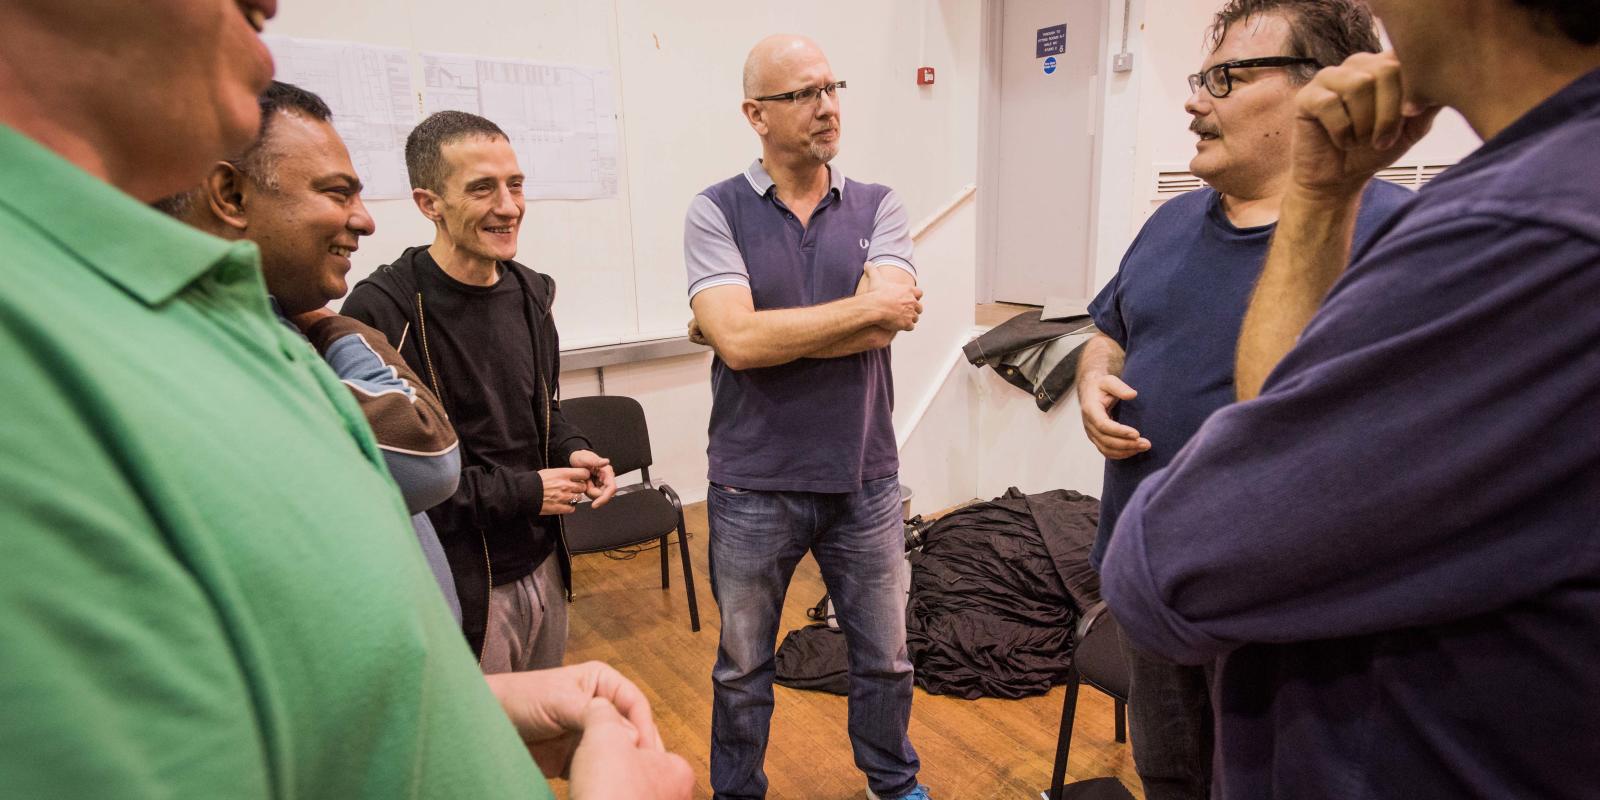 Group of men in discussion during rehearsals for ENO's Don Giovanni